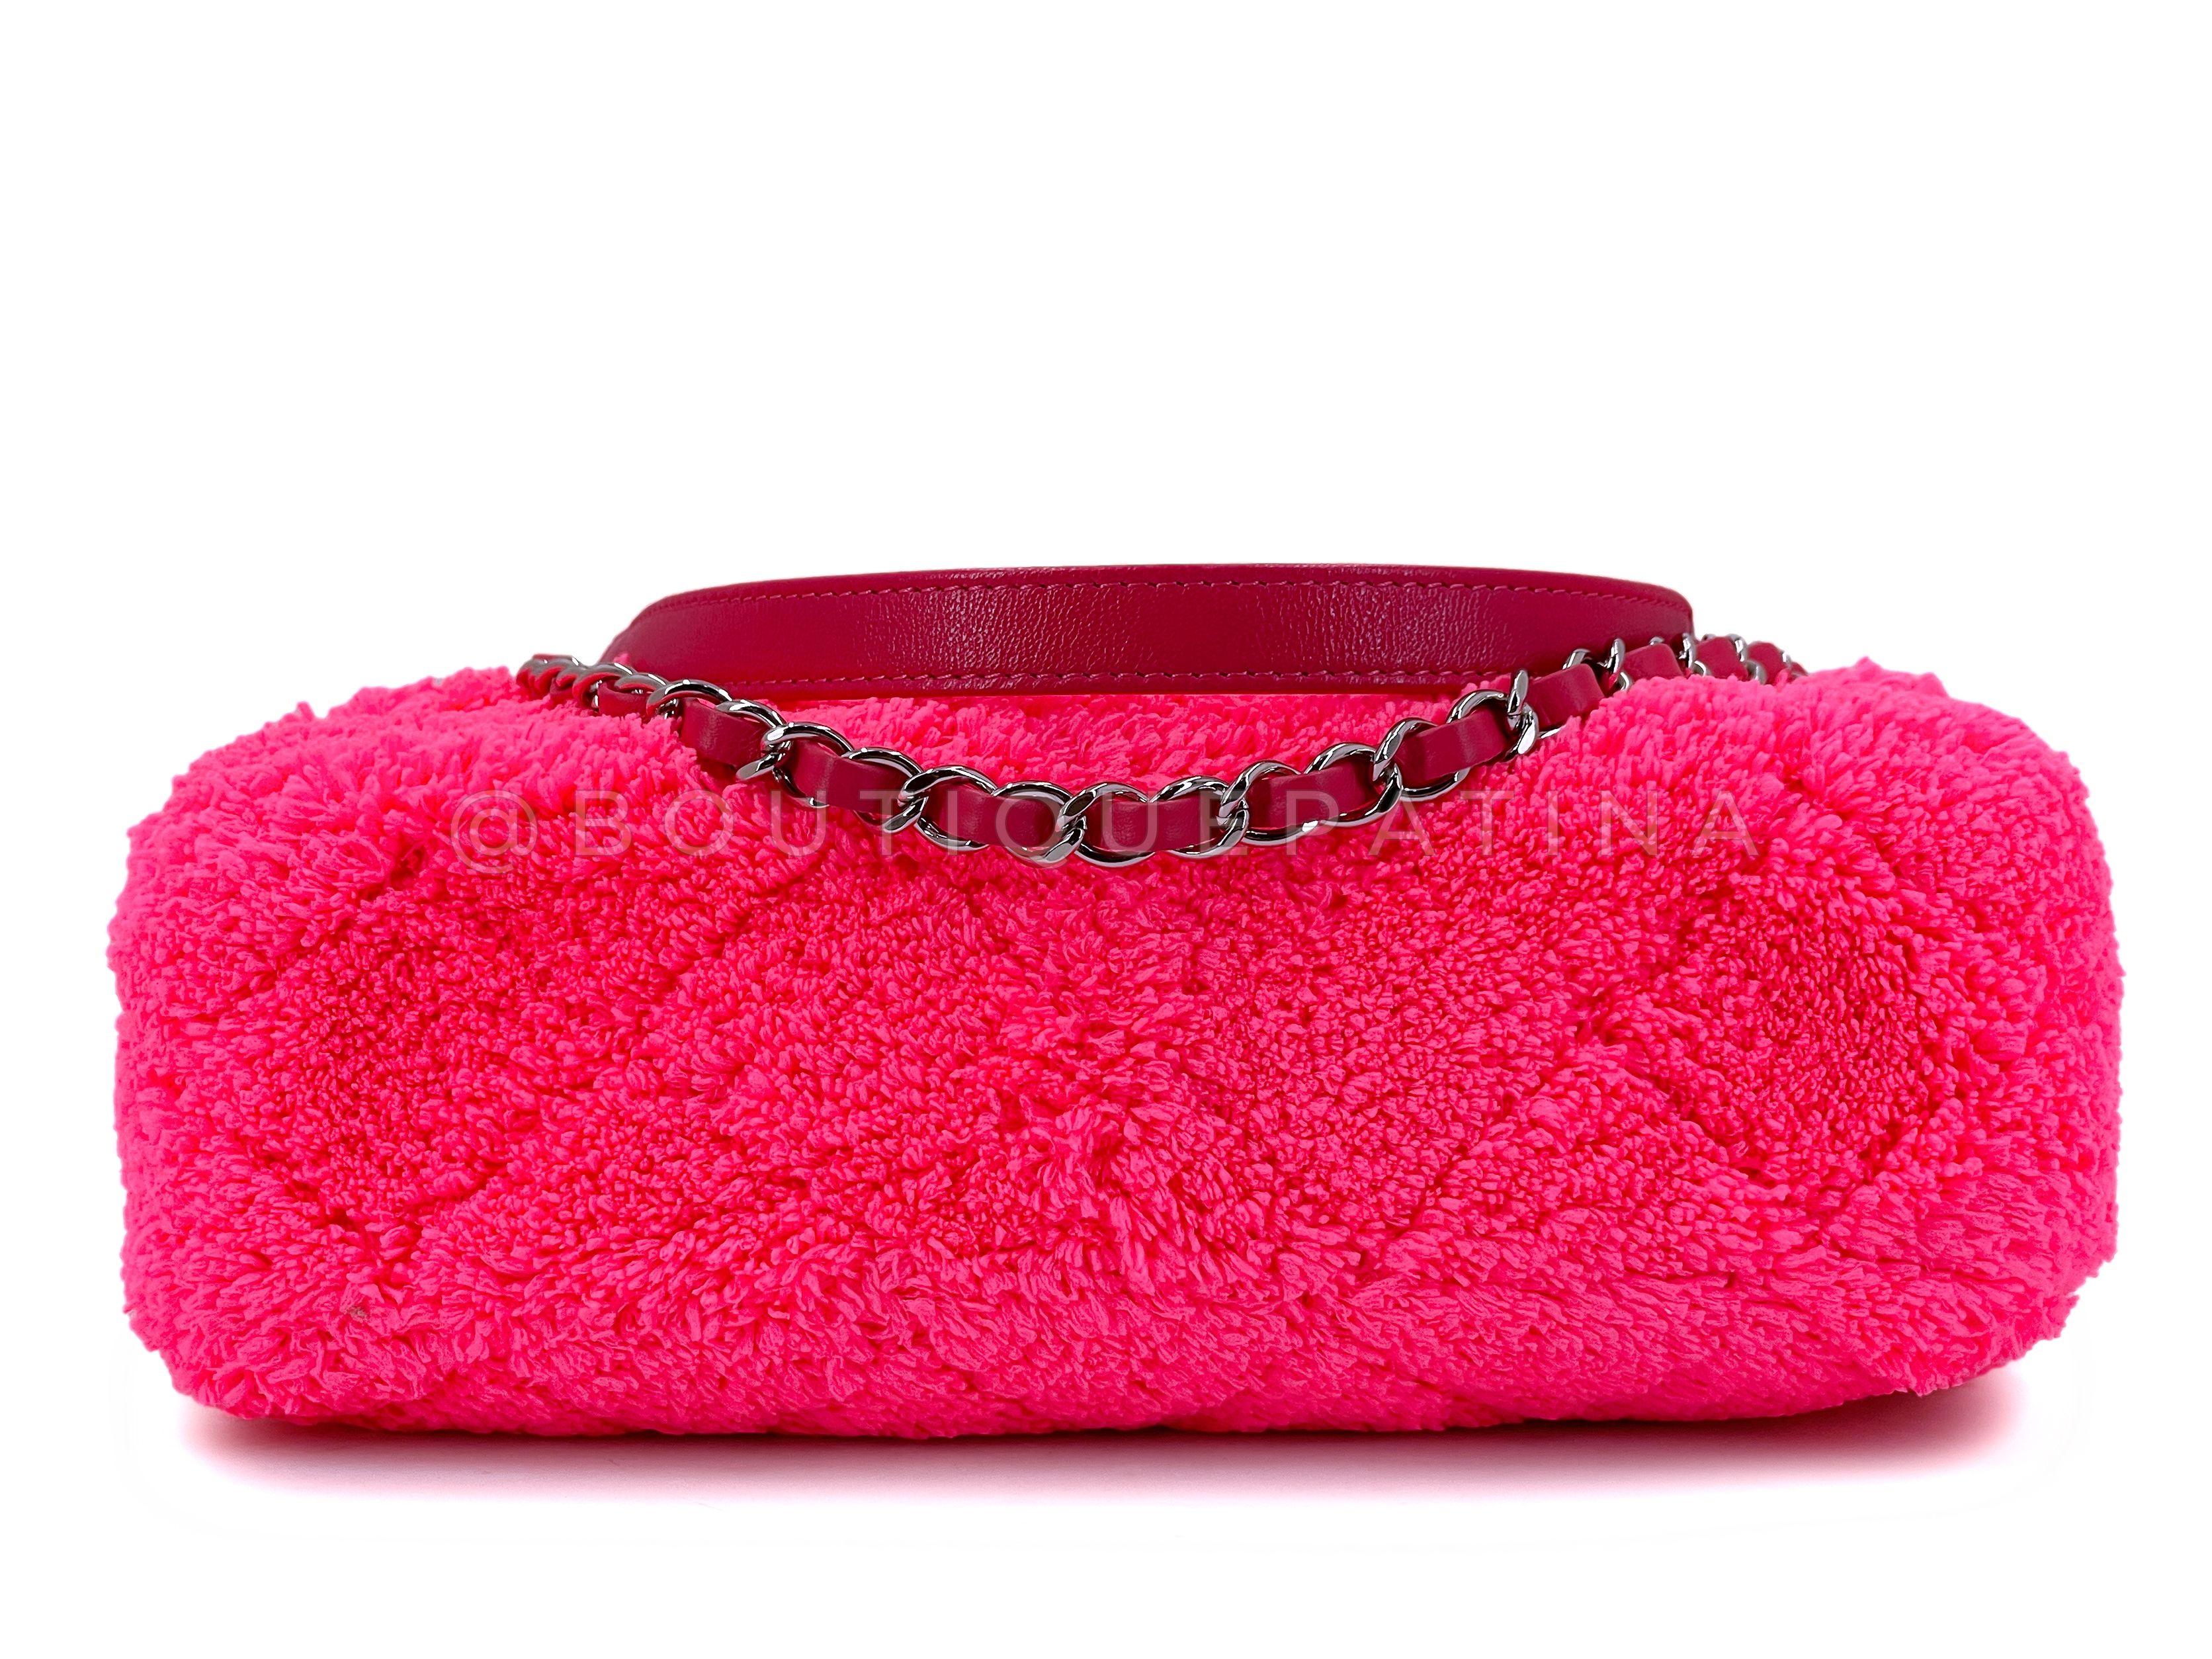 Chanel Neon Pink Terry Fur Flap Bag 67683 For Sale 2